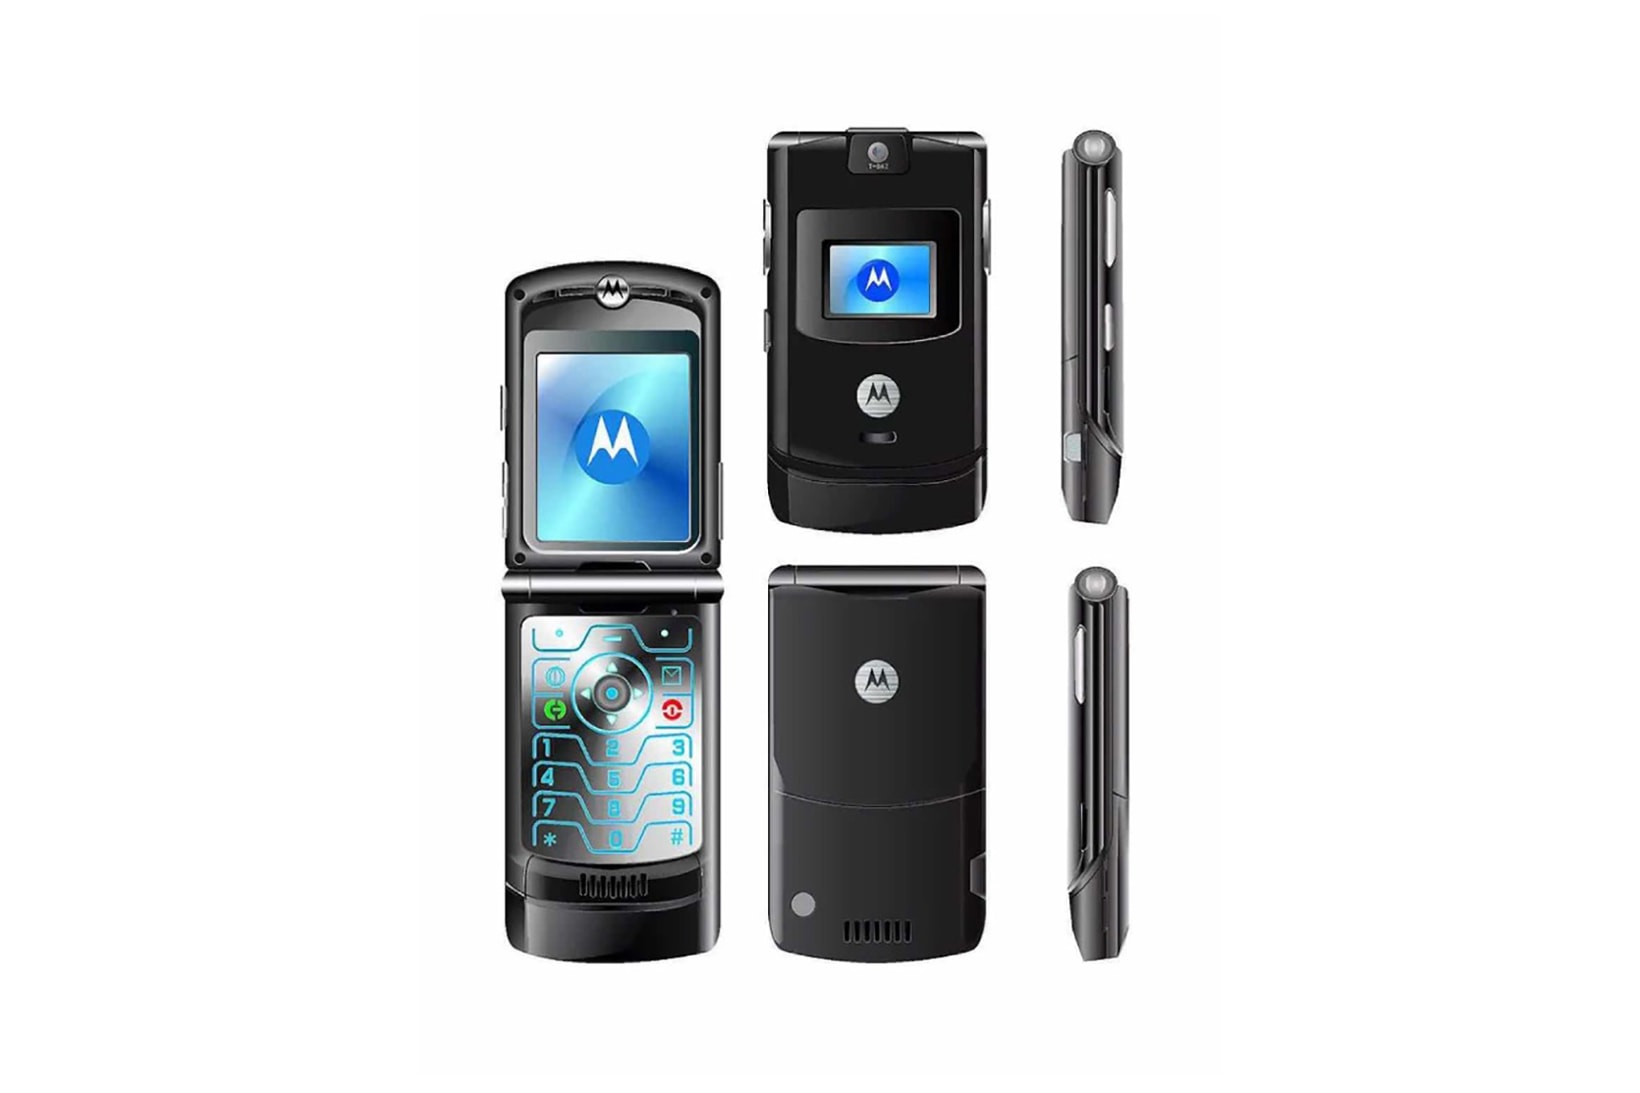 The Motorola Razr is rumoured to be making a comeback for 2019 as